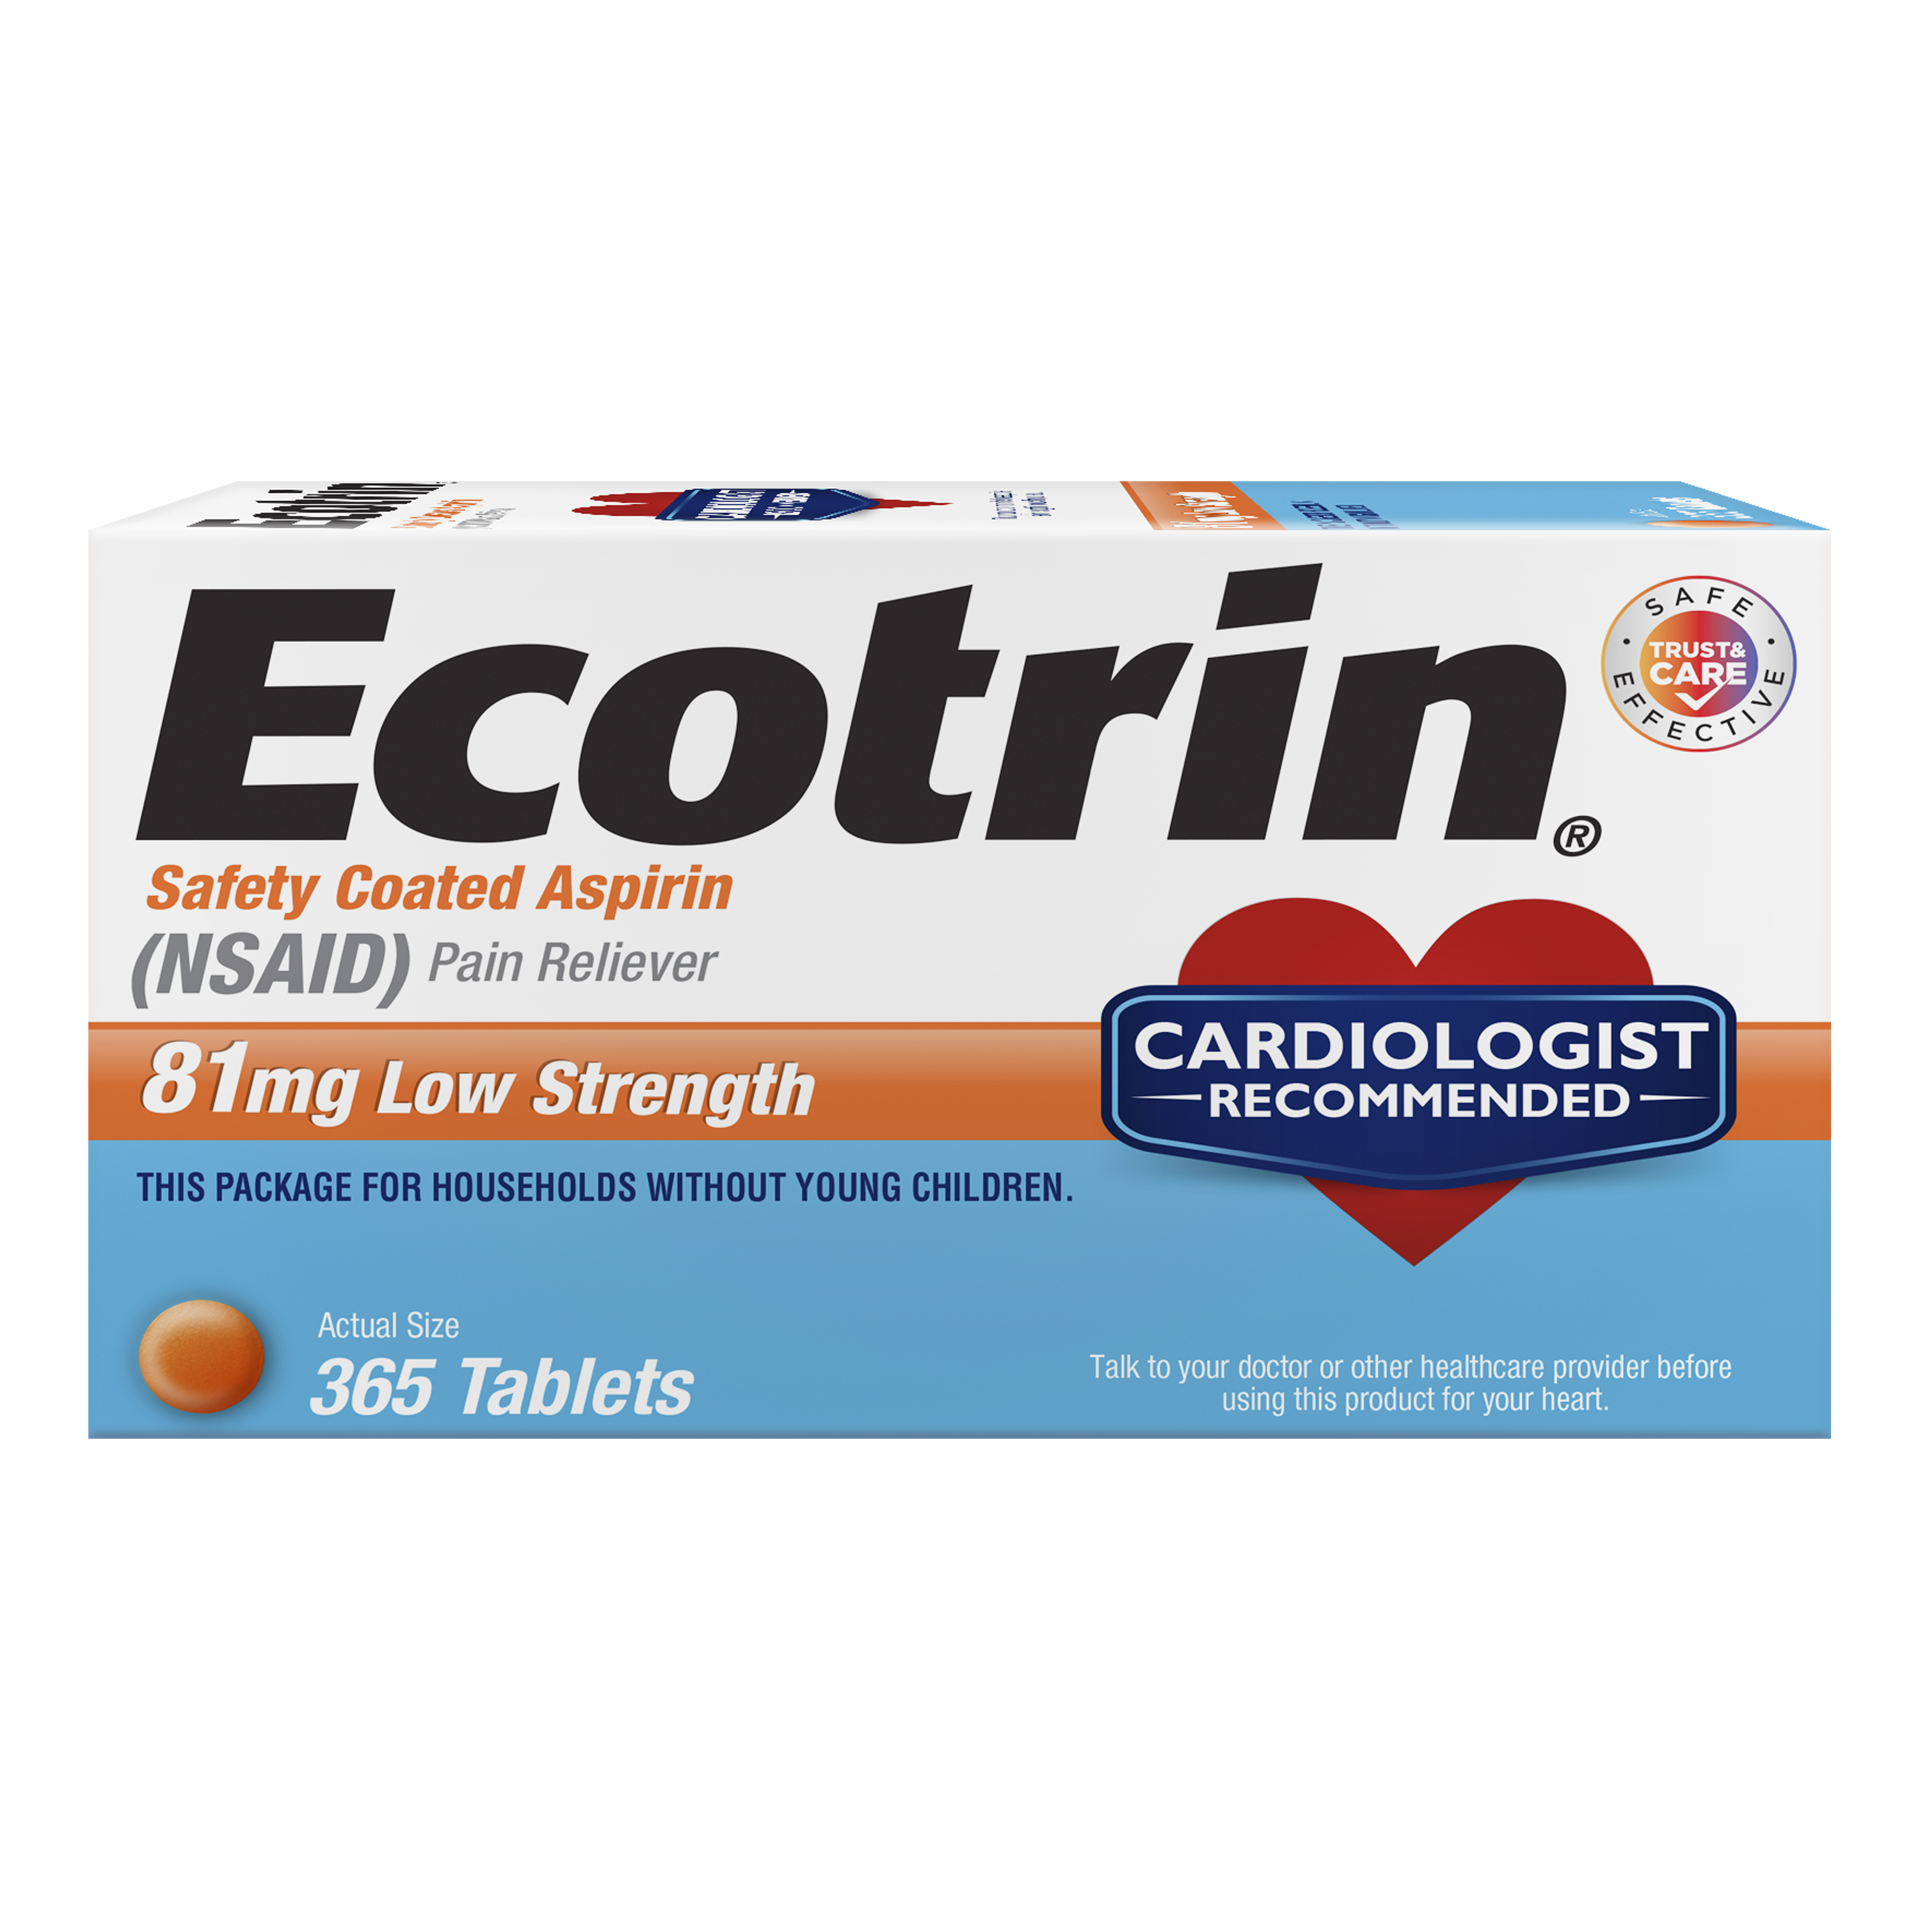 slide 1 of 10, Ecotrin Low Strength Safety Coated Aspirin, NSAID, 81mg, 365 Tablets, 365 pk